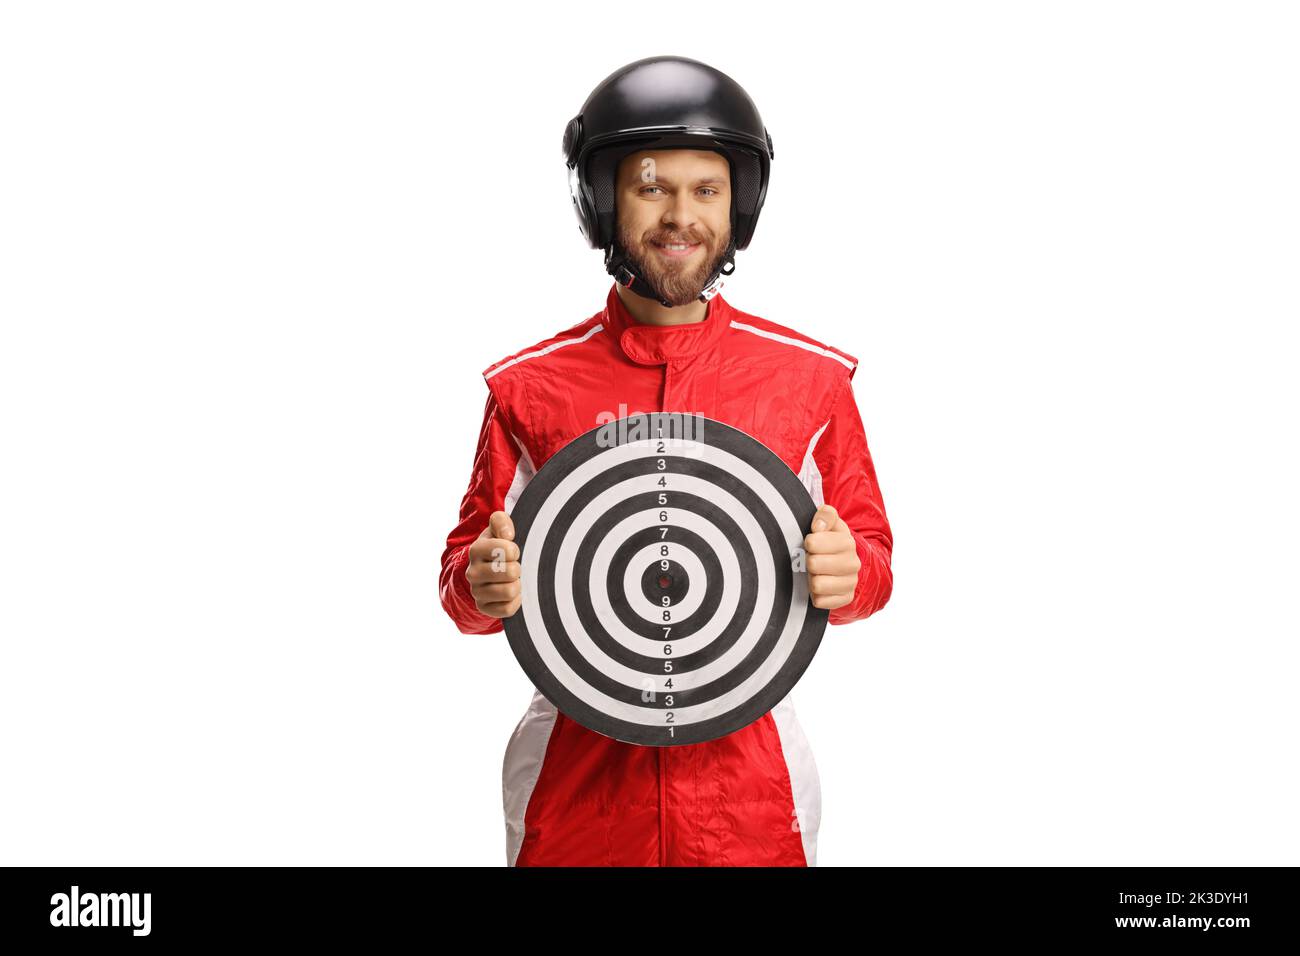 Motorsport racer in a red suit holding a target for darts isolated on white background Stock Photo